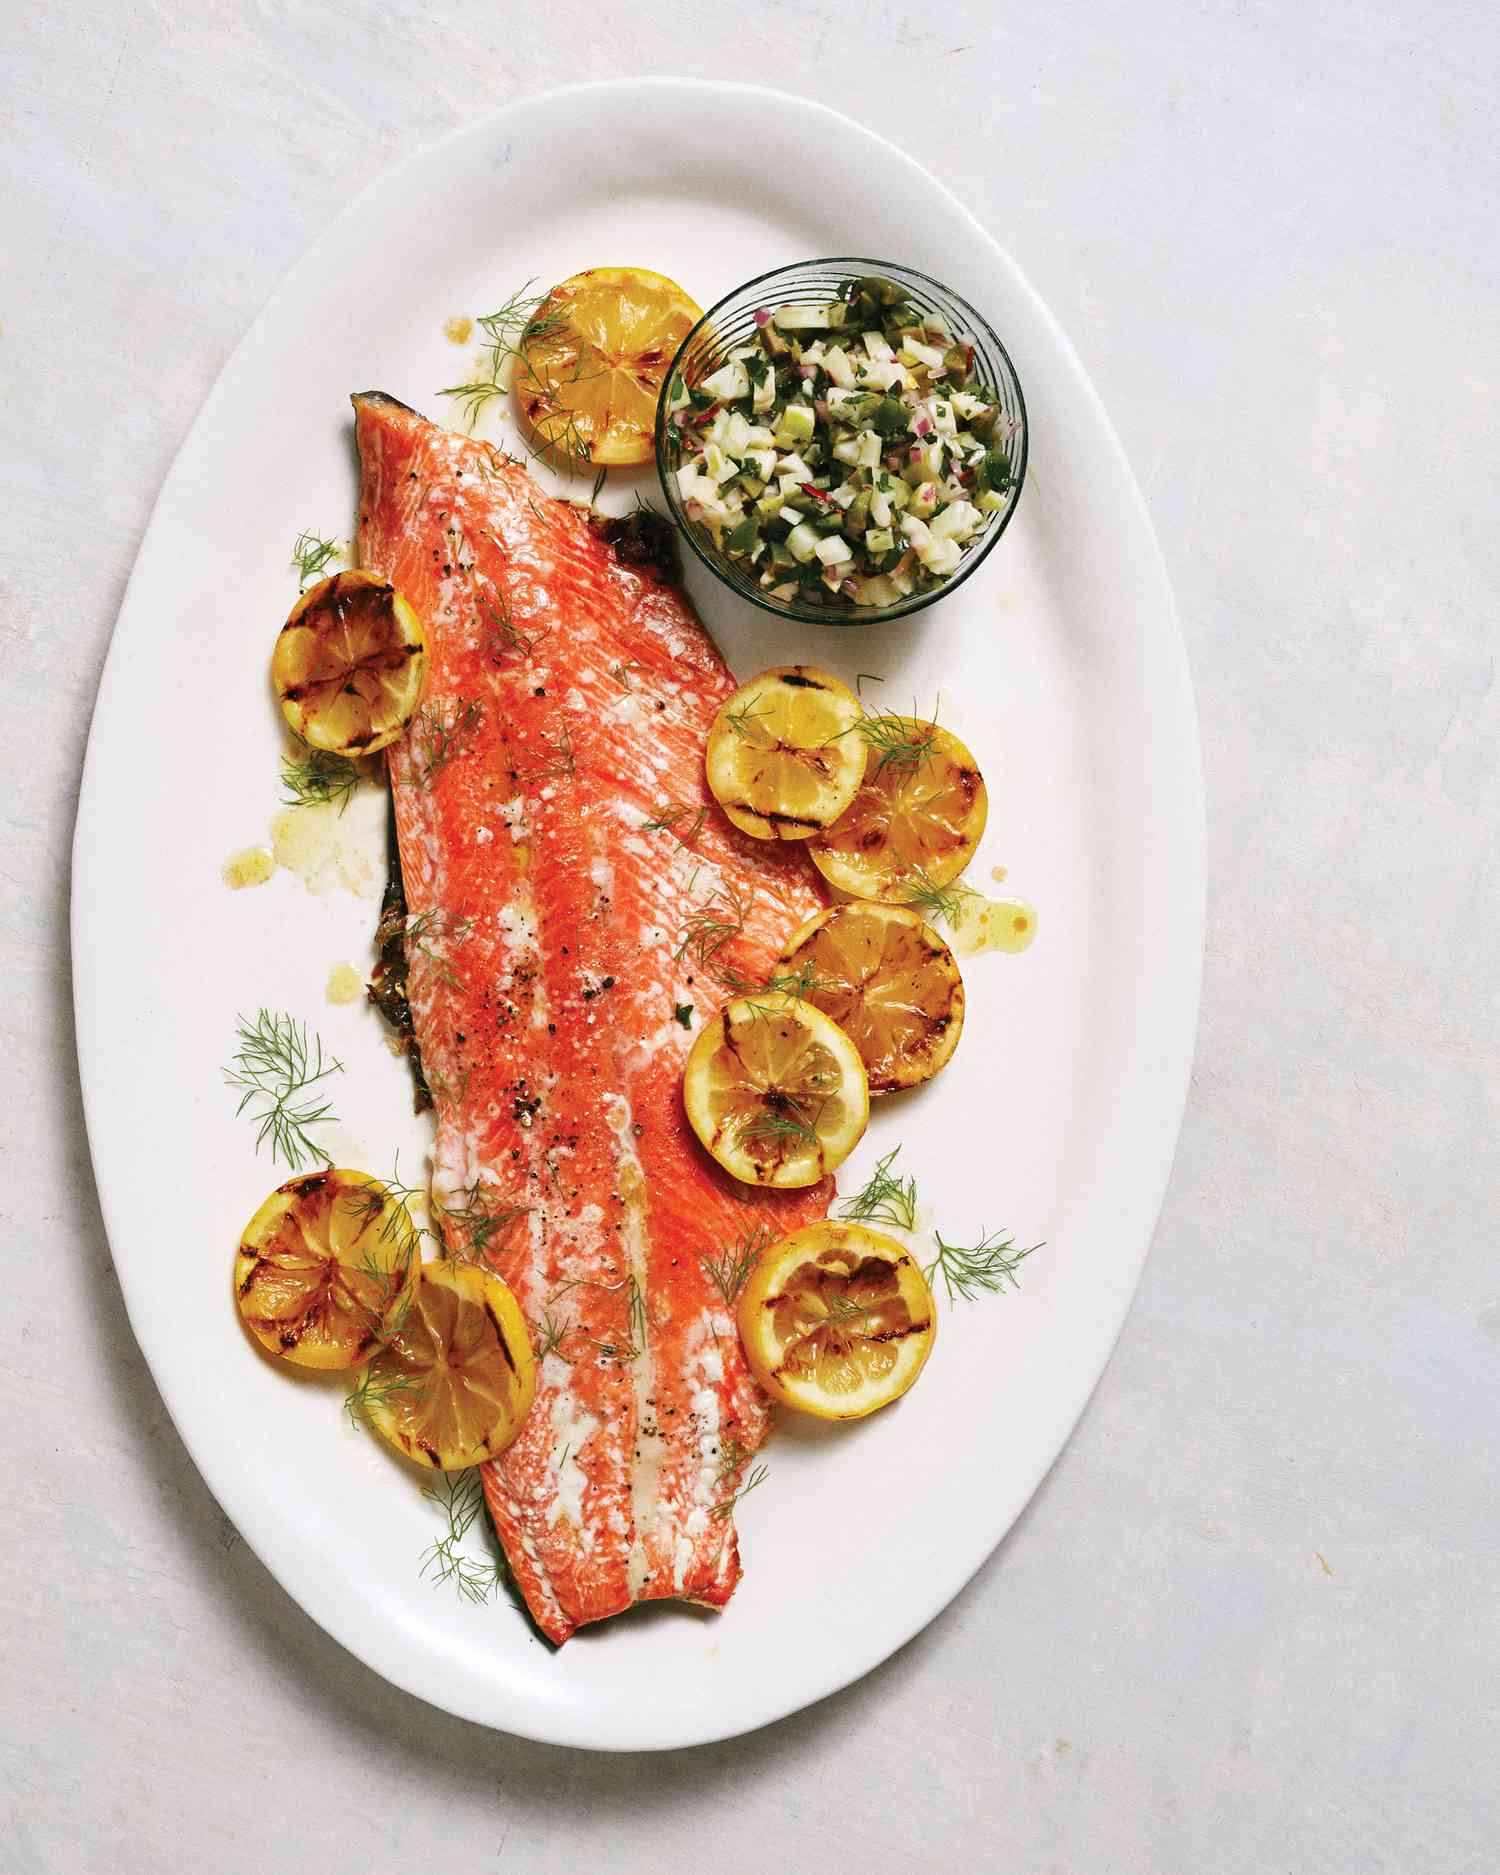 Crisp Grilled Salmon with Fennel-Olive Relish